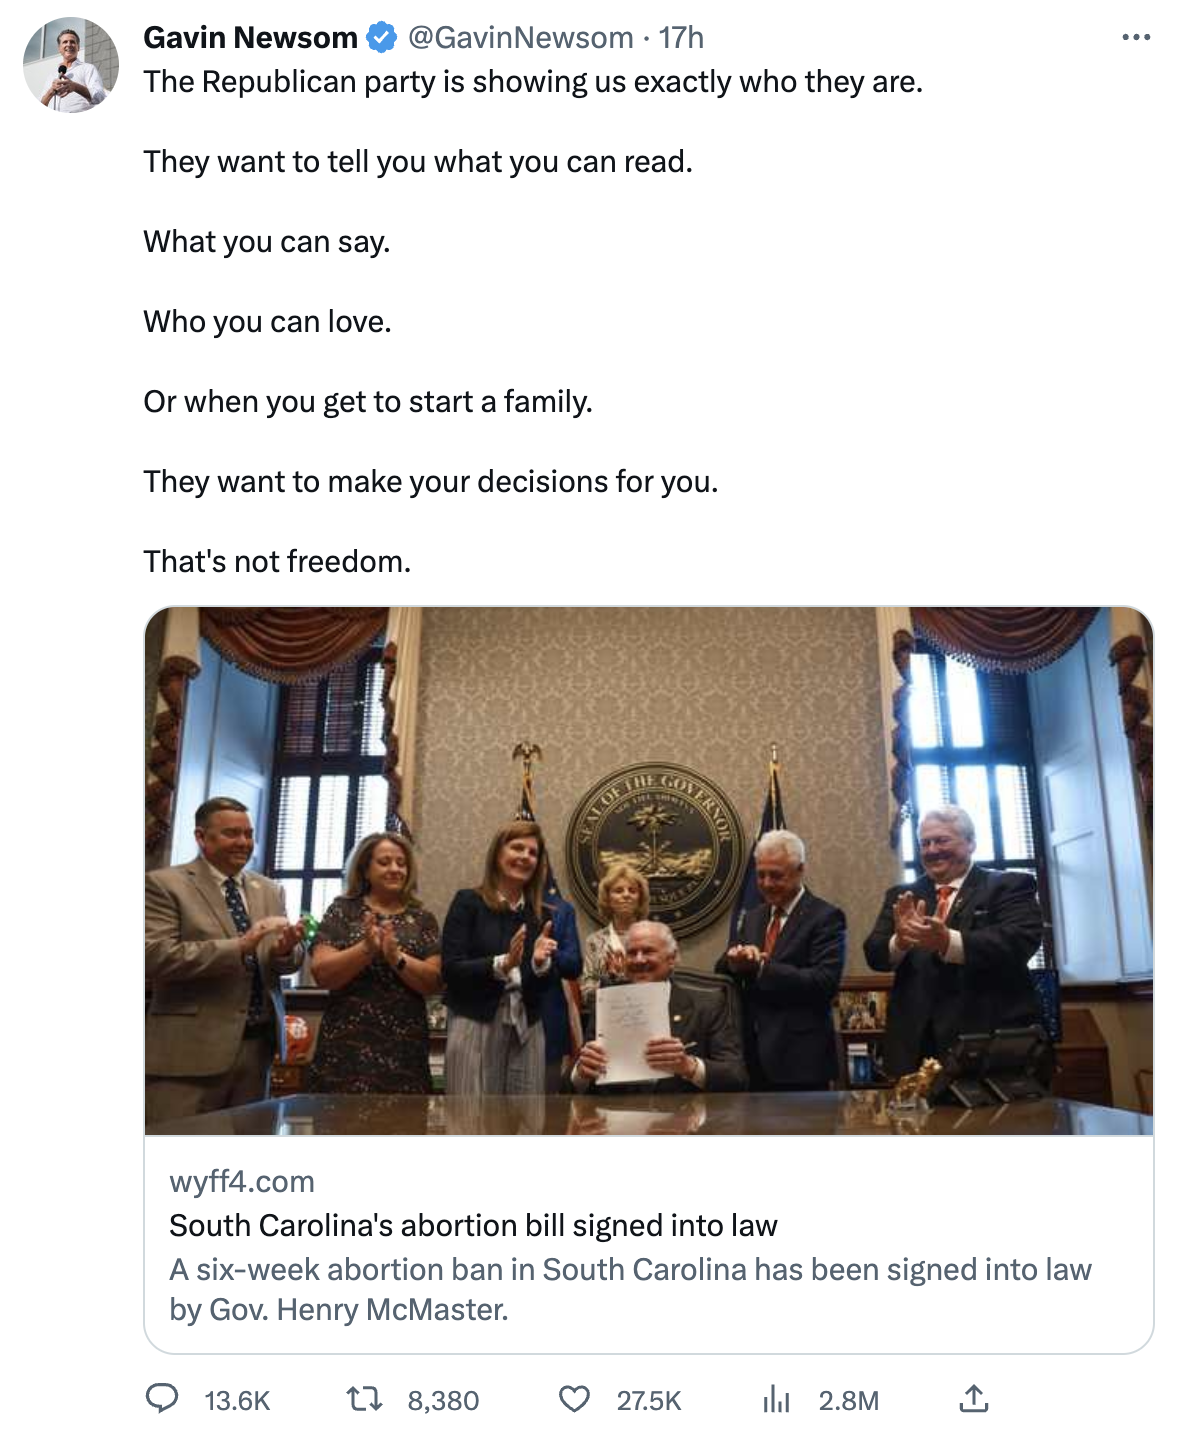 Tweet from Gavin Newsom: 'The Republican party is showing us exactly who they are. They want to tell you what you can read. What you can say. Who you can love. Or when you get to start a family. They want to make your decisions for you. That's not freedom.'